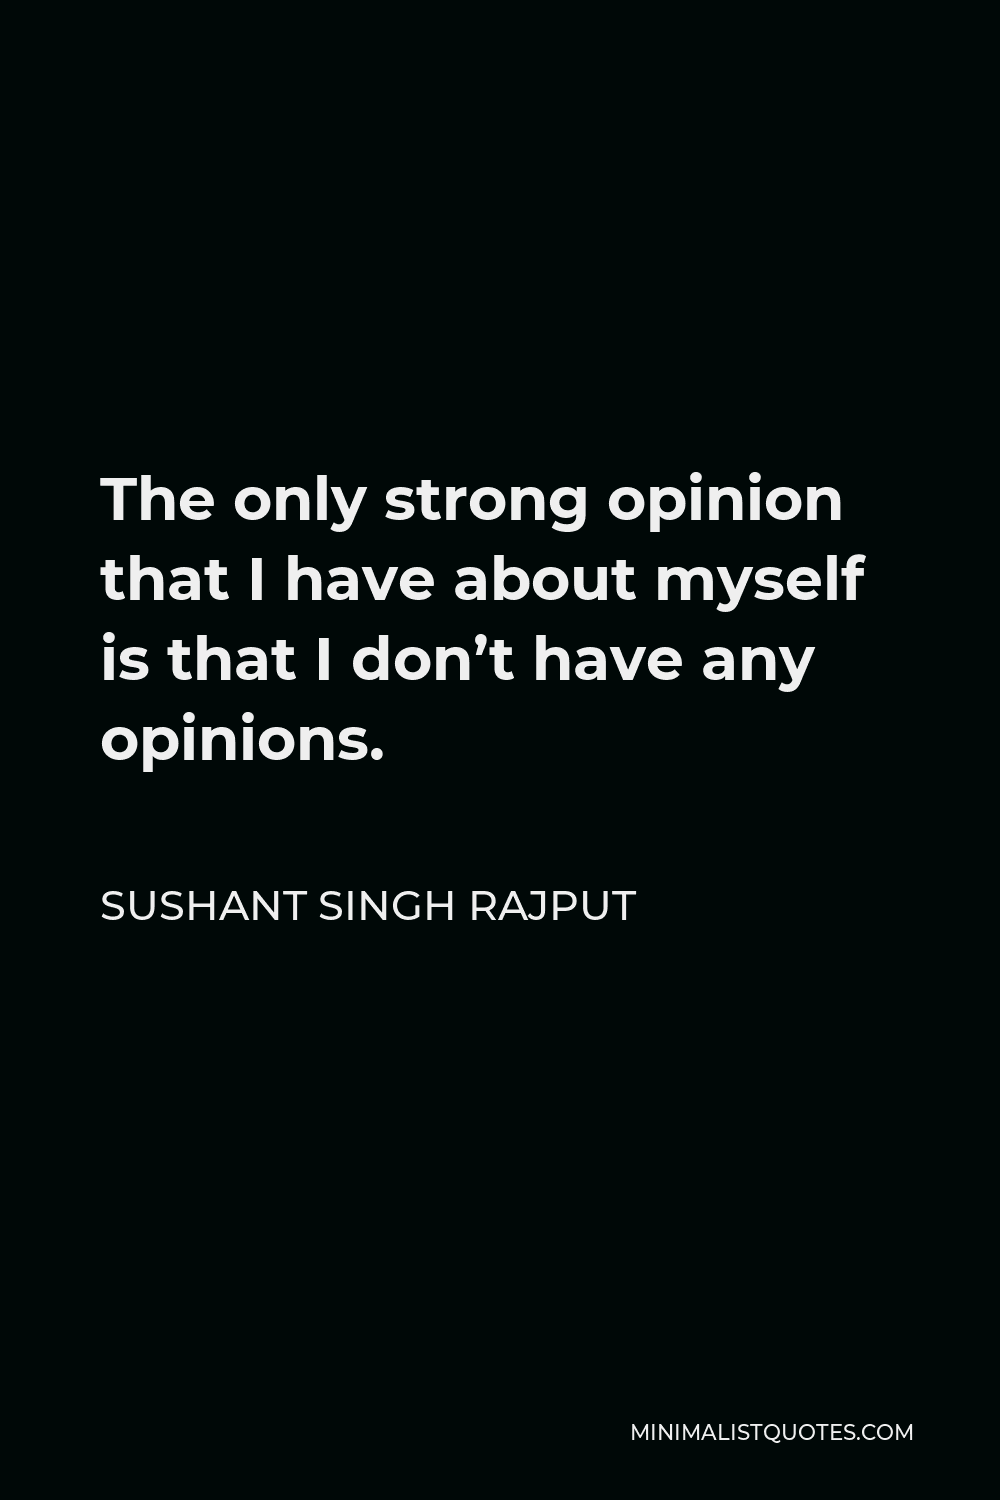 Sushant Singh Rajput Quote - The only strong opinion that I have about myself is that I don’t have any opinions.